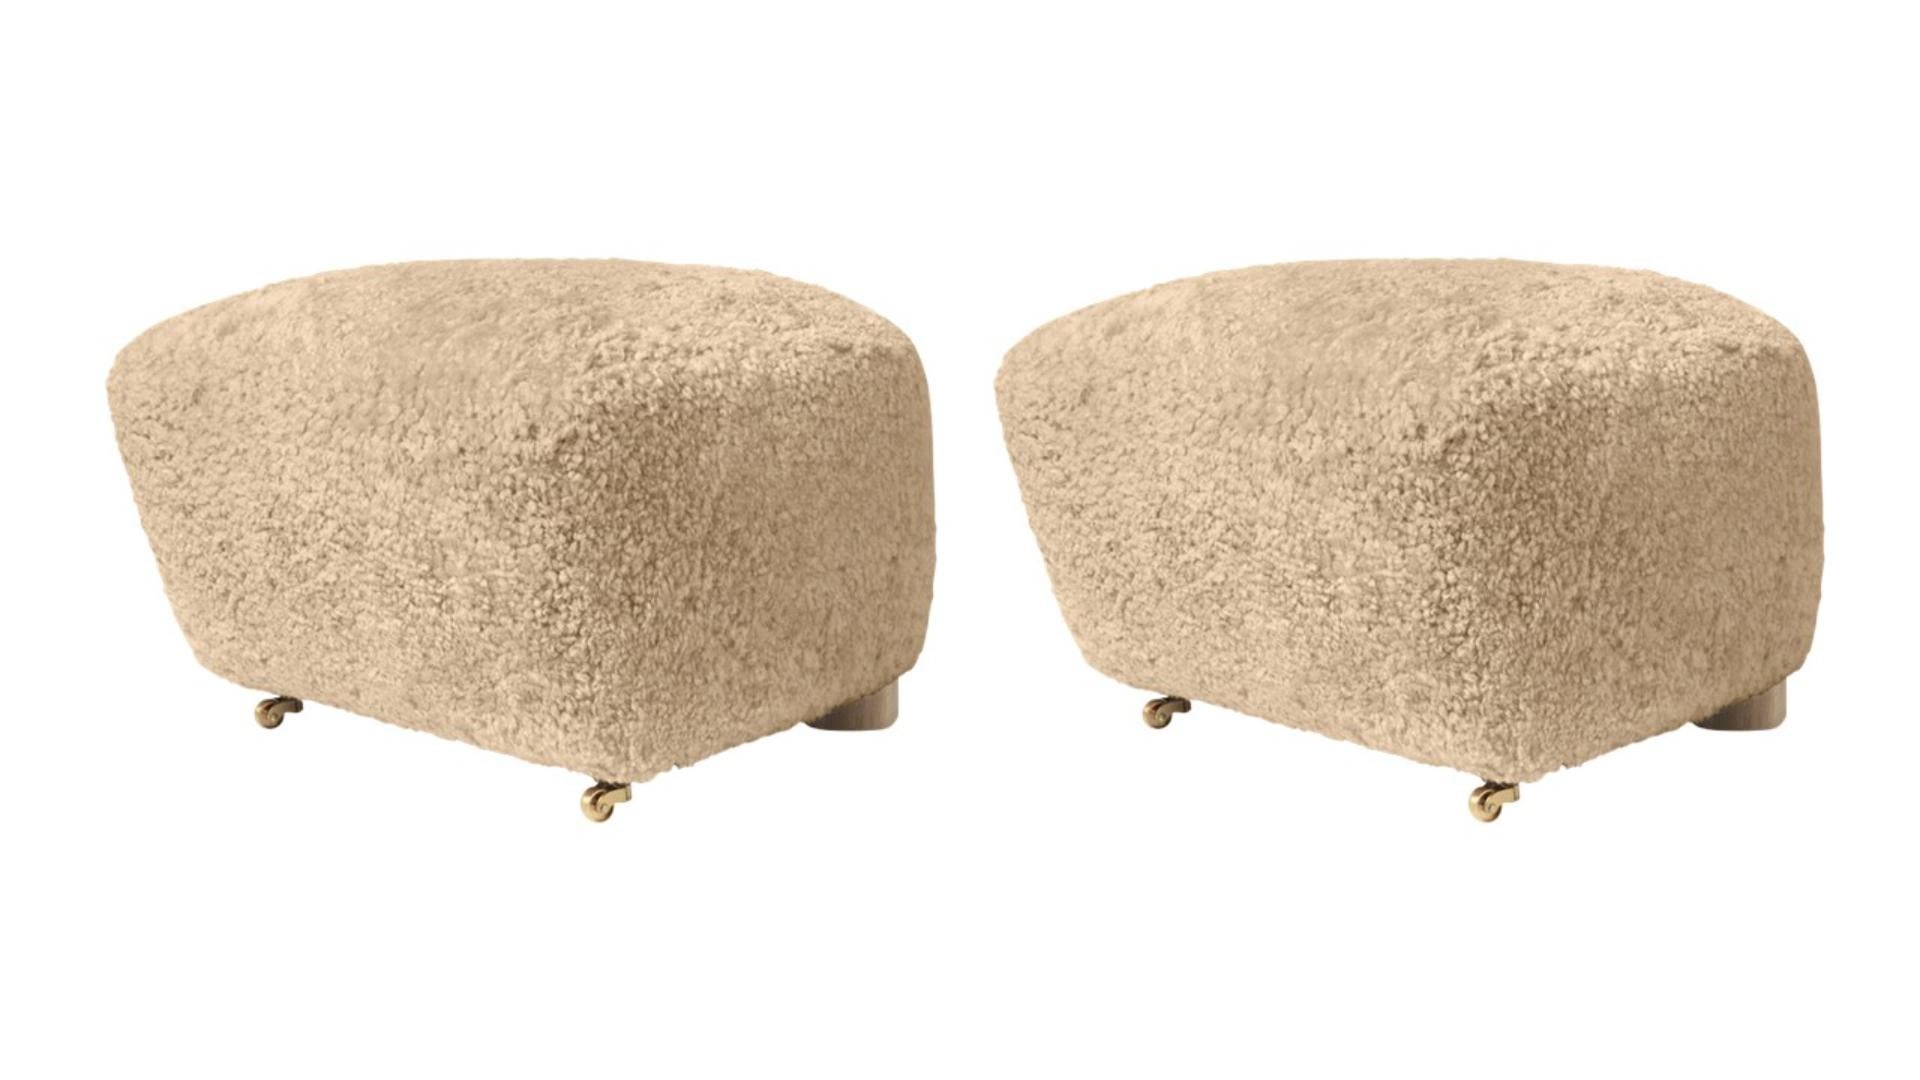 Set of 2 honey natural oak sheepskin the tired man footstools by Lassen.
Dimensions: W 55 x D 53 x H 36 cm 
Materials: Sheepskin

Flemming Lassen designed the overstuffed easy chair, The Tired Man, for The Copenhagen Cabinetmakers’ Guild